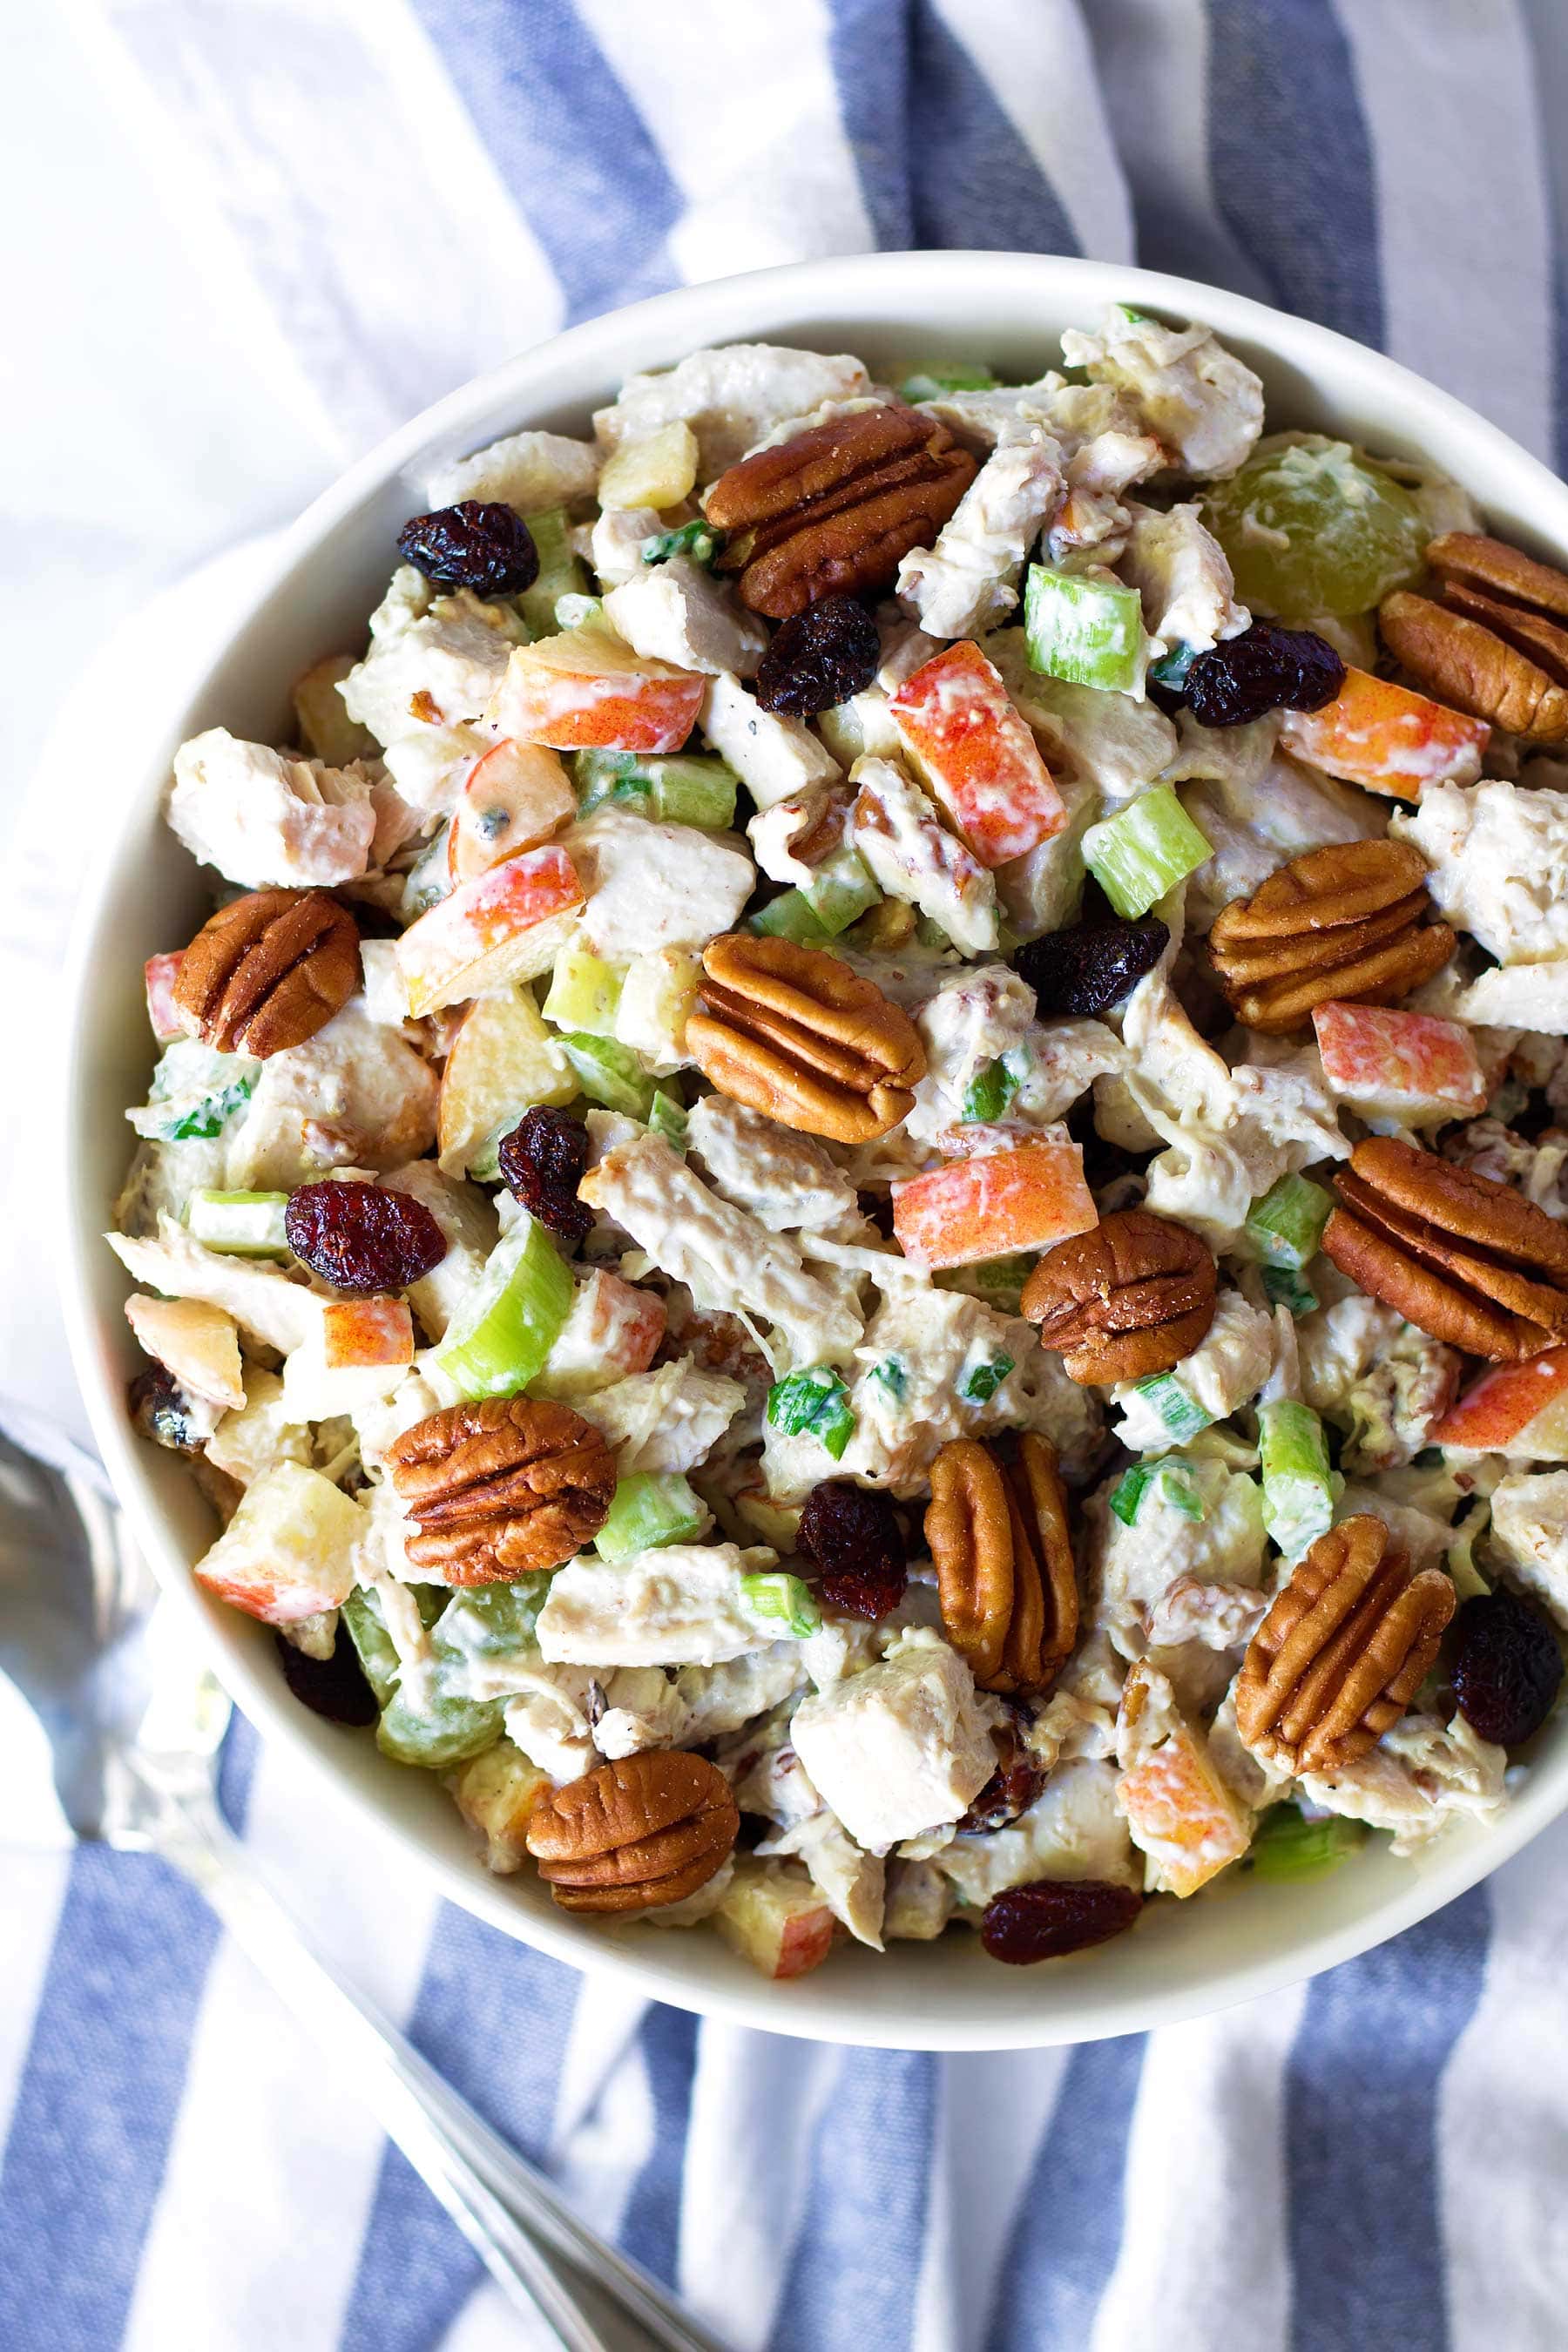 Use up your leftover turkey with this easy recipe! This Leftover Turkey Salad recipe is so simple to make, paleo, gluten free, Whole30, and can easily be made low carb and keto! 
#healthythanksgiving #healthychristmas #turkey #leftoverturkey #thanksgivingleftovers #christmasrecipes #jicama #apple #cranberries #crasins #pecans #glutenfreethanksgiving #glutenfree #ketothanksgiving #ketochristmas #lowcarbthanksgiving #lowcarbchristmas